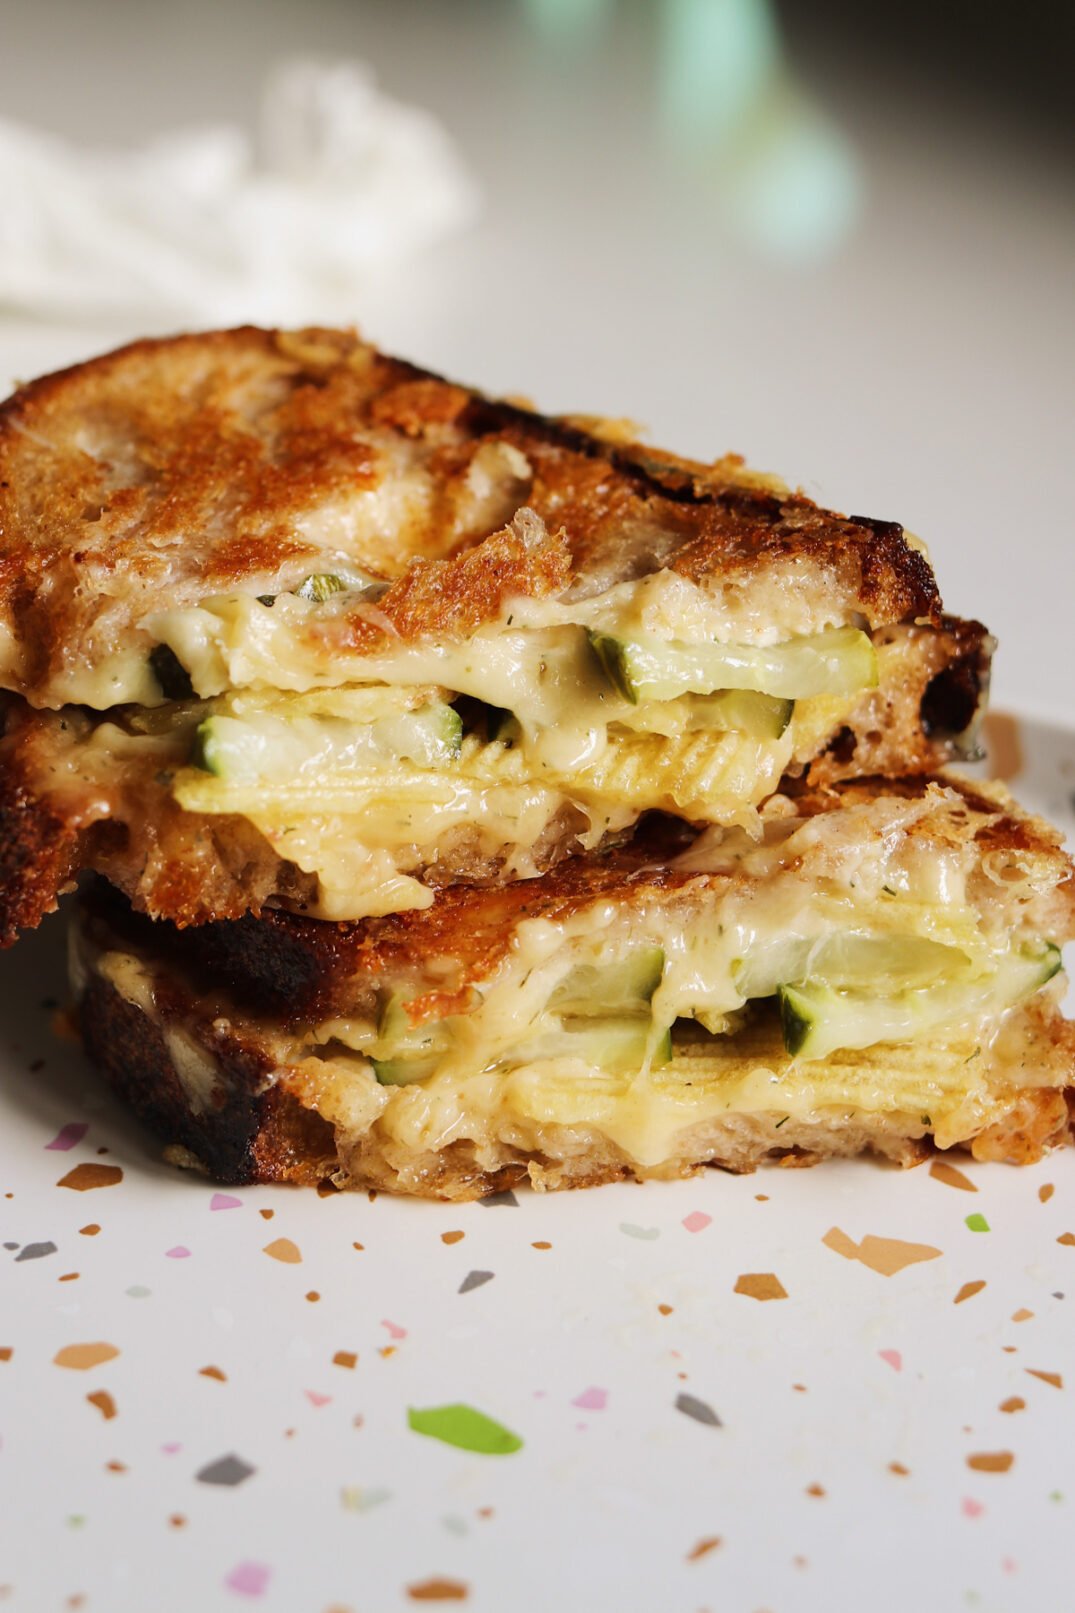 a dill pickle grilled cheese cut in half sitting on a speckled plate.